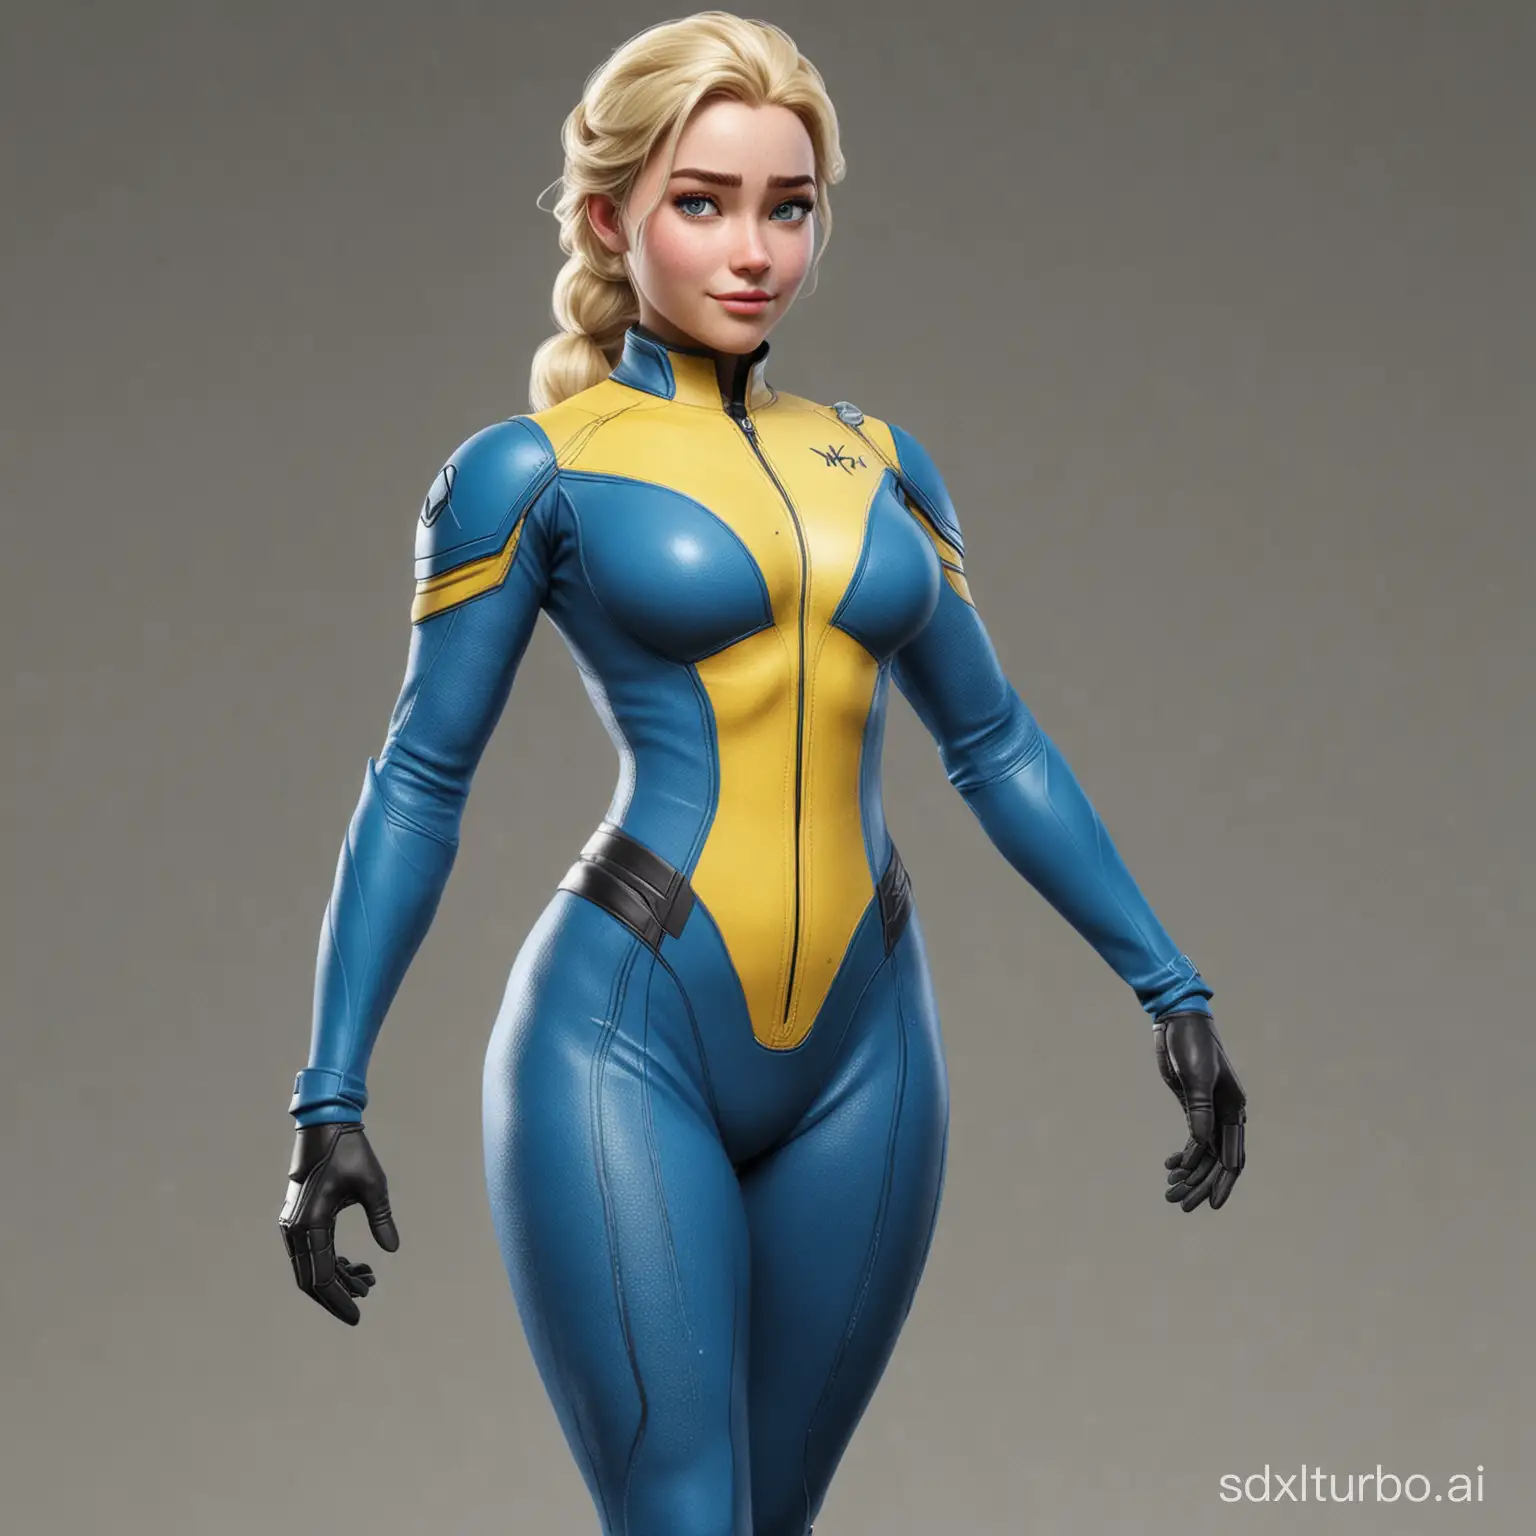 realistic elsa full body, with thick fit body, x men tight uniform, small choulders, big ass, freckless with fallout blue and yellow suit